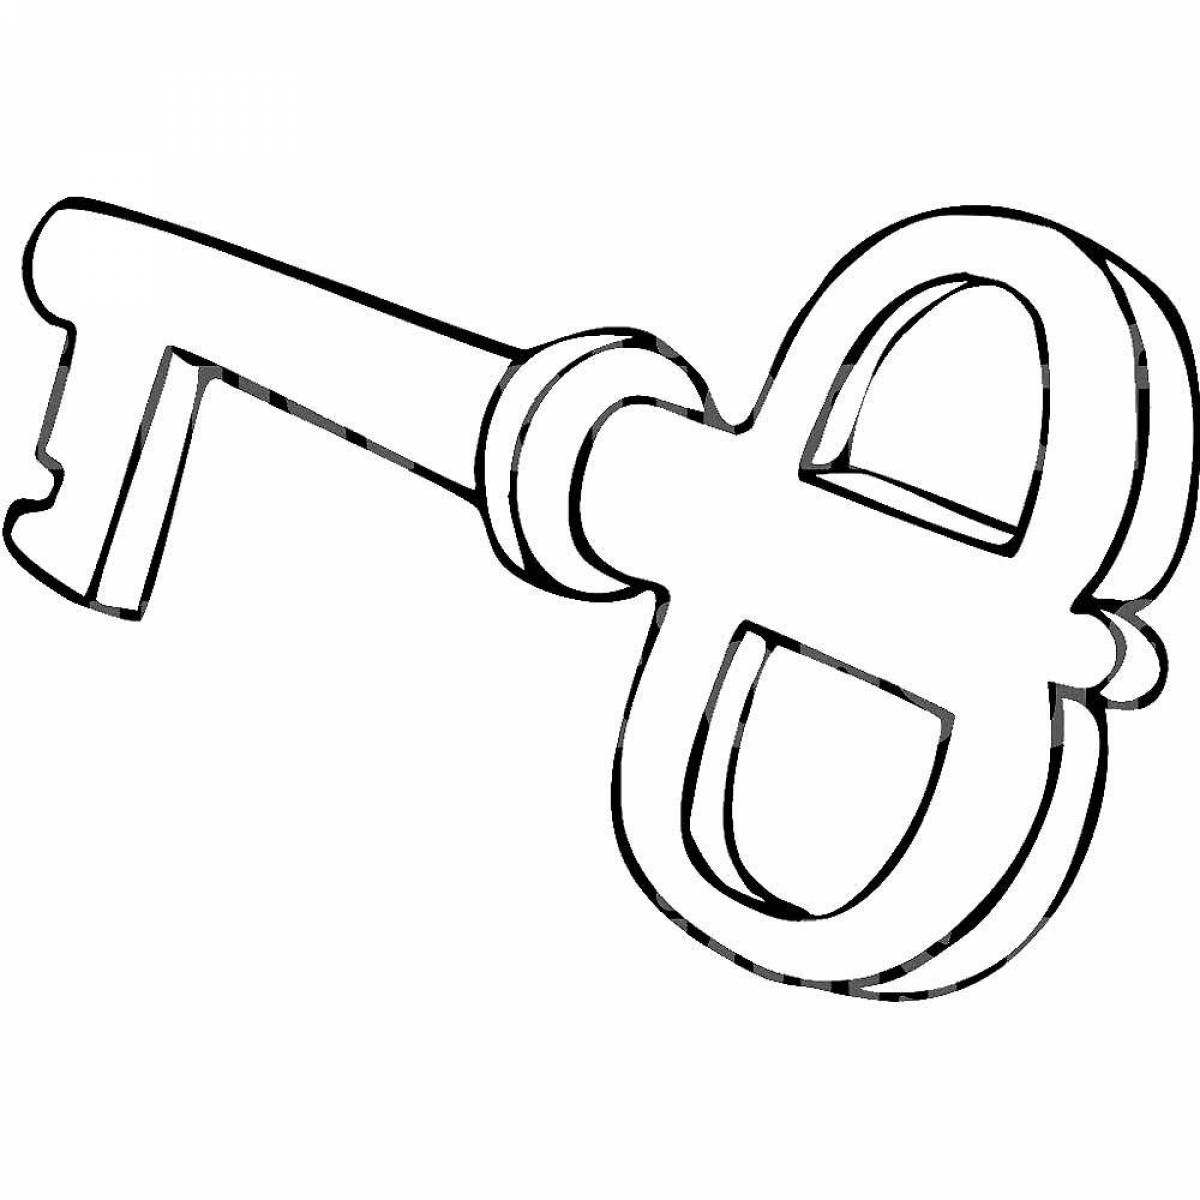 Glamourous golden key coloring page